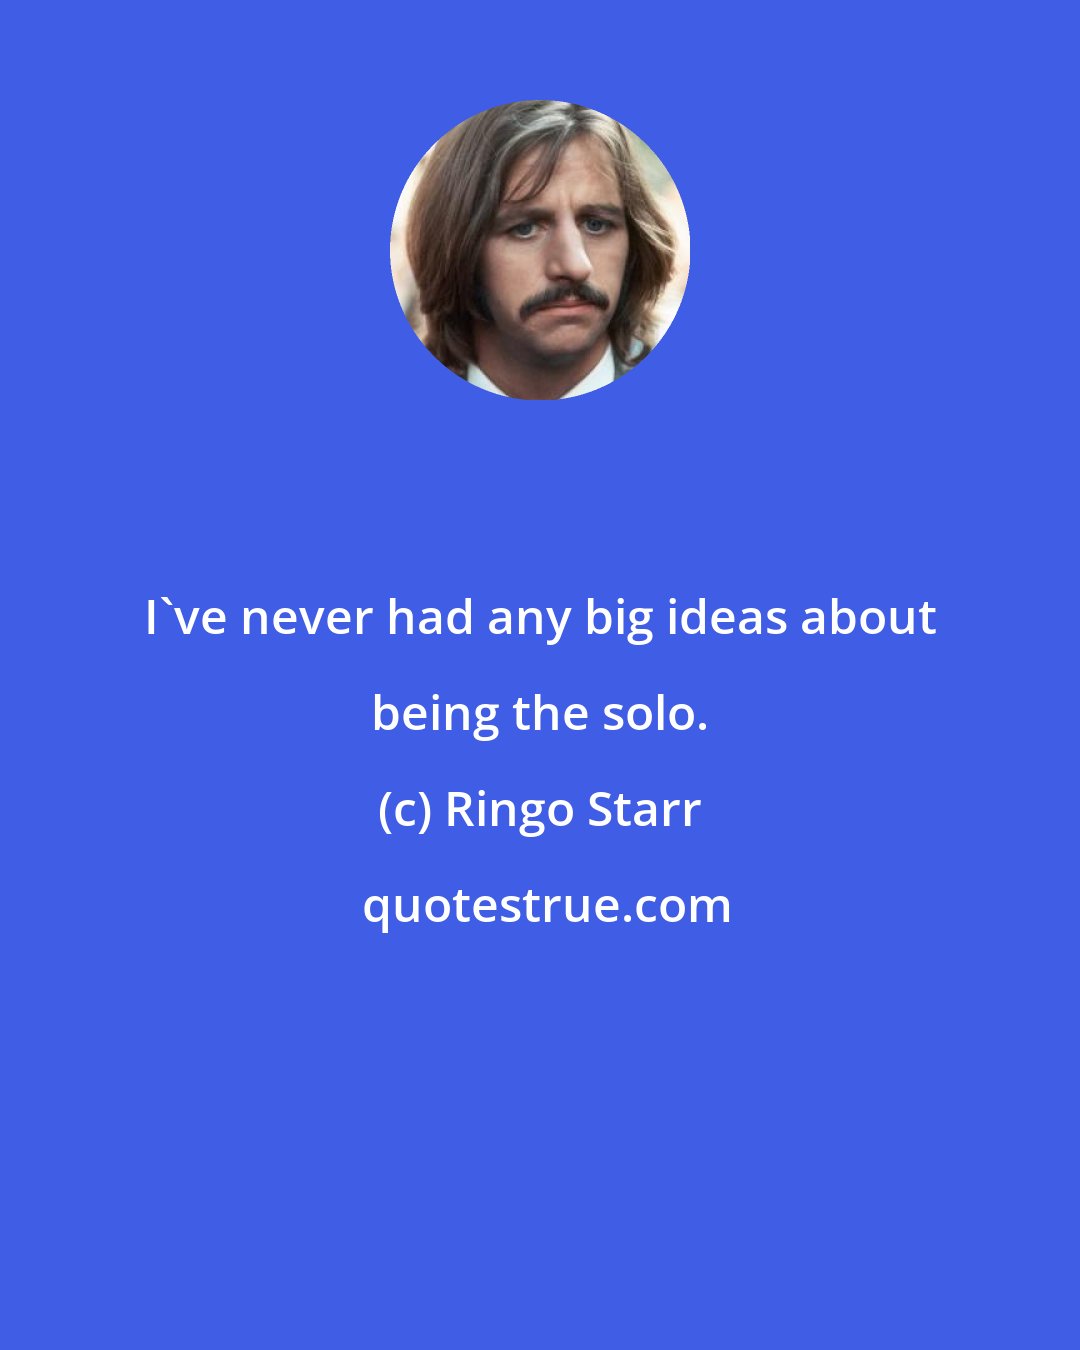 Ringo Starr: I've never had any big ideas about being the solo.